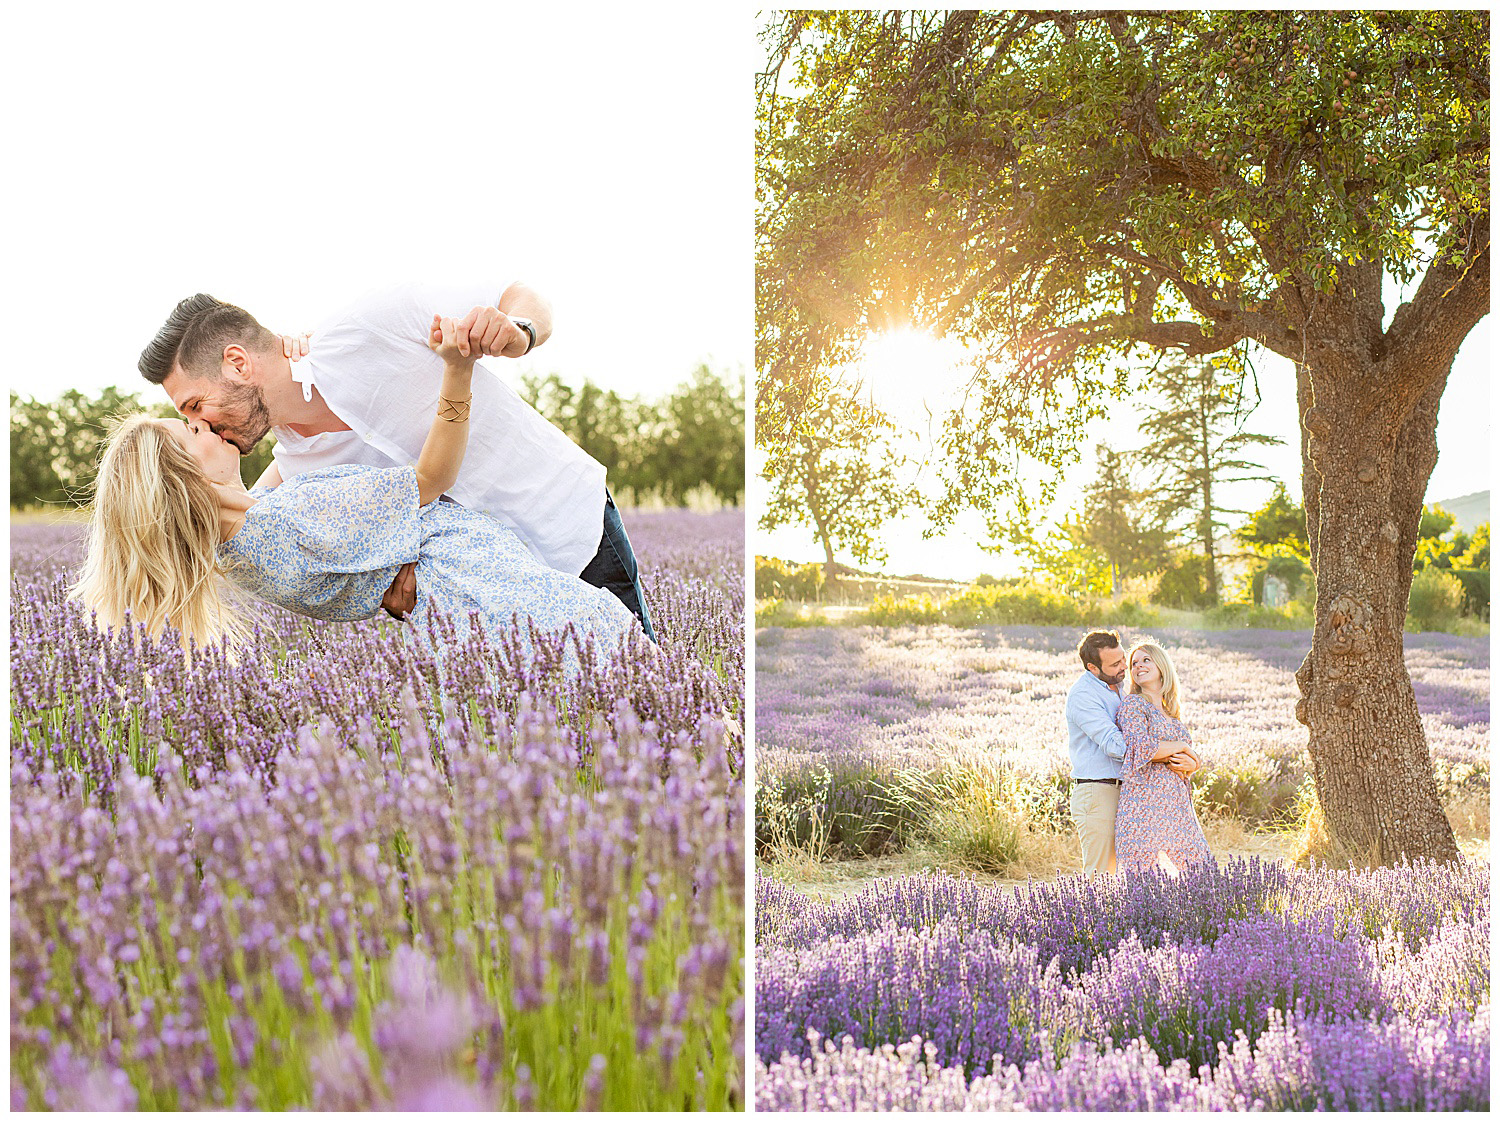 Marie Calfopoulos Photographer in Provence France lavender fields in Sault photo session